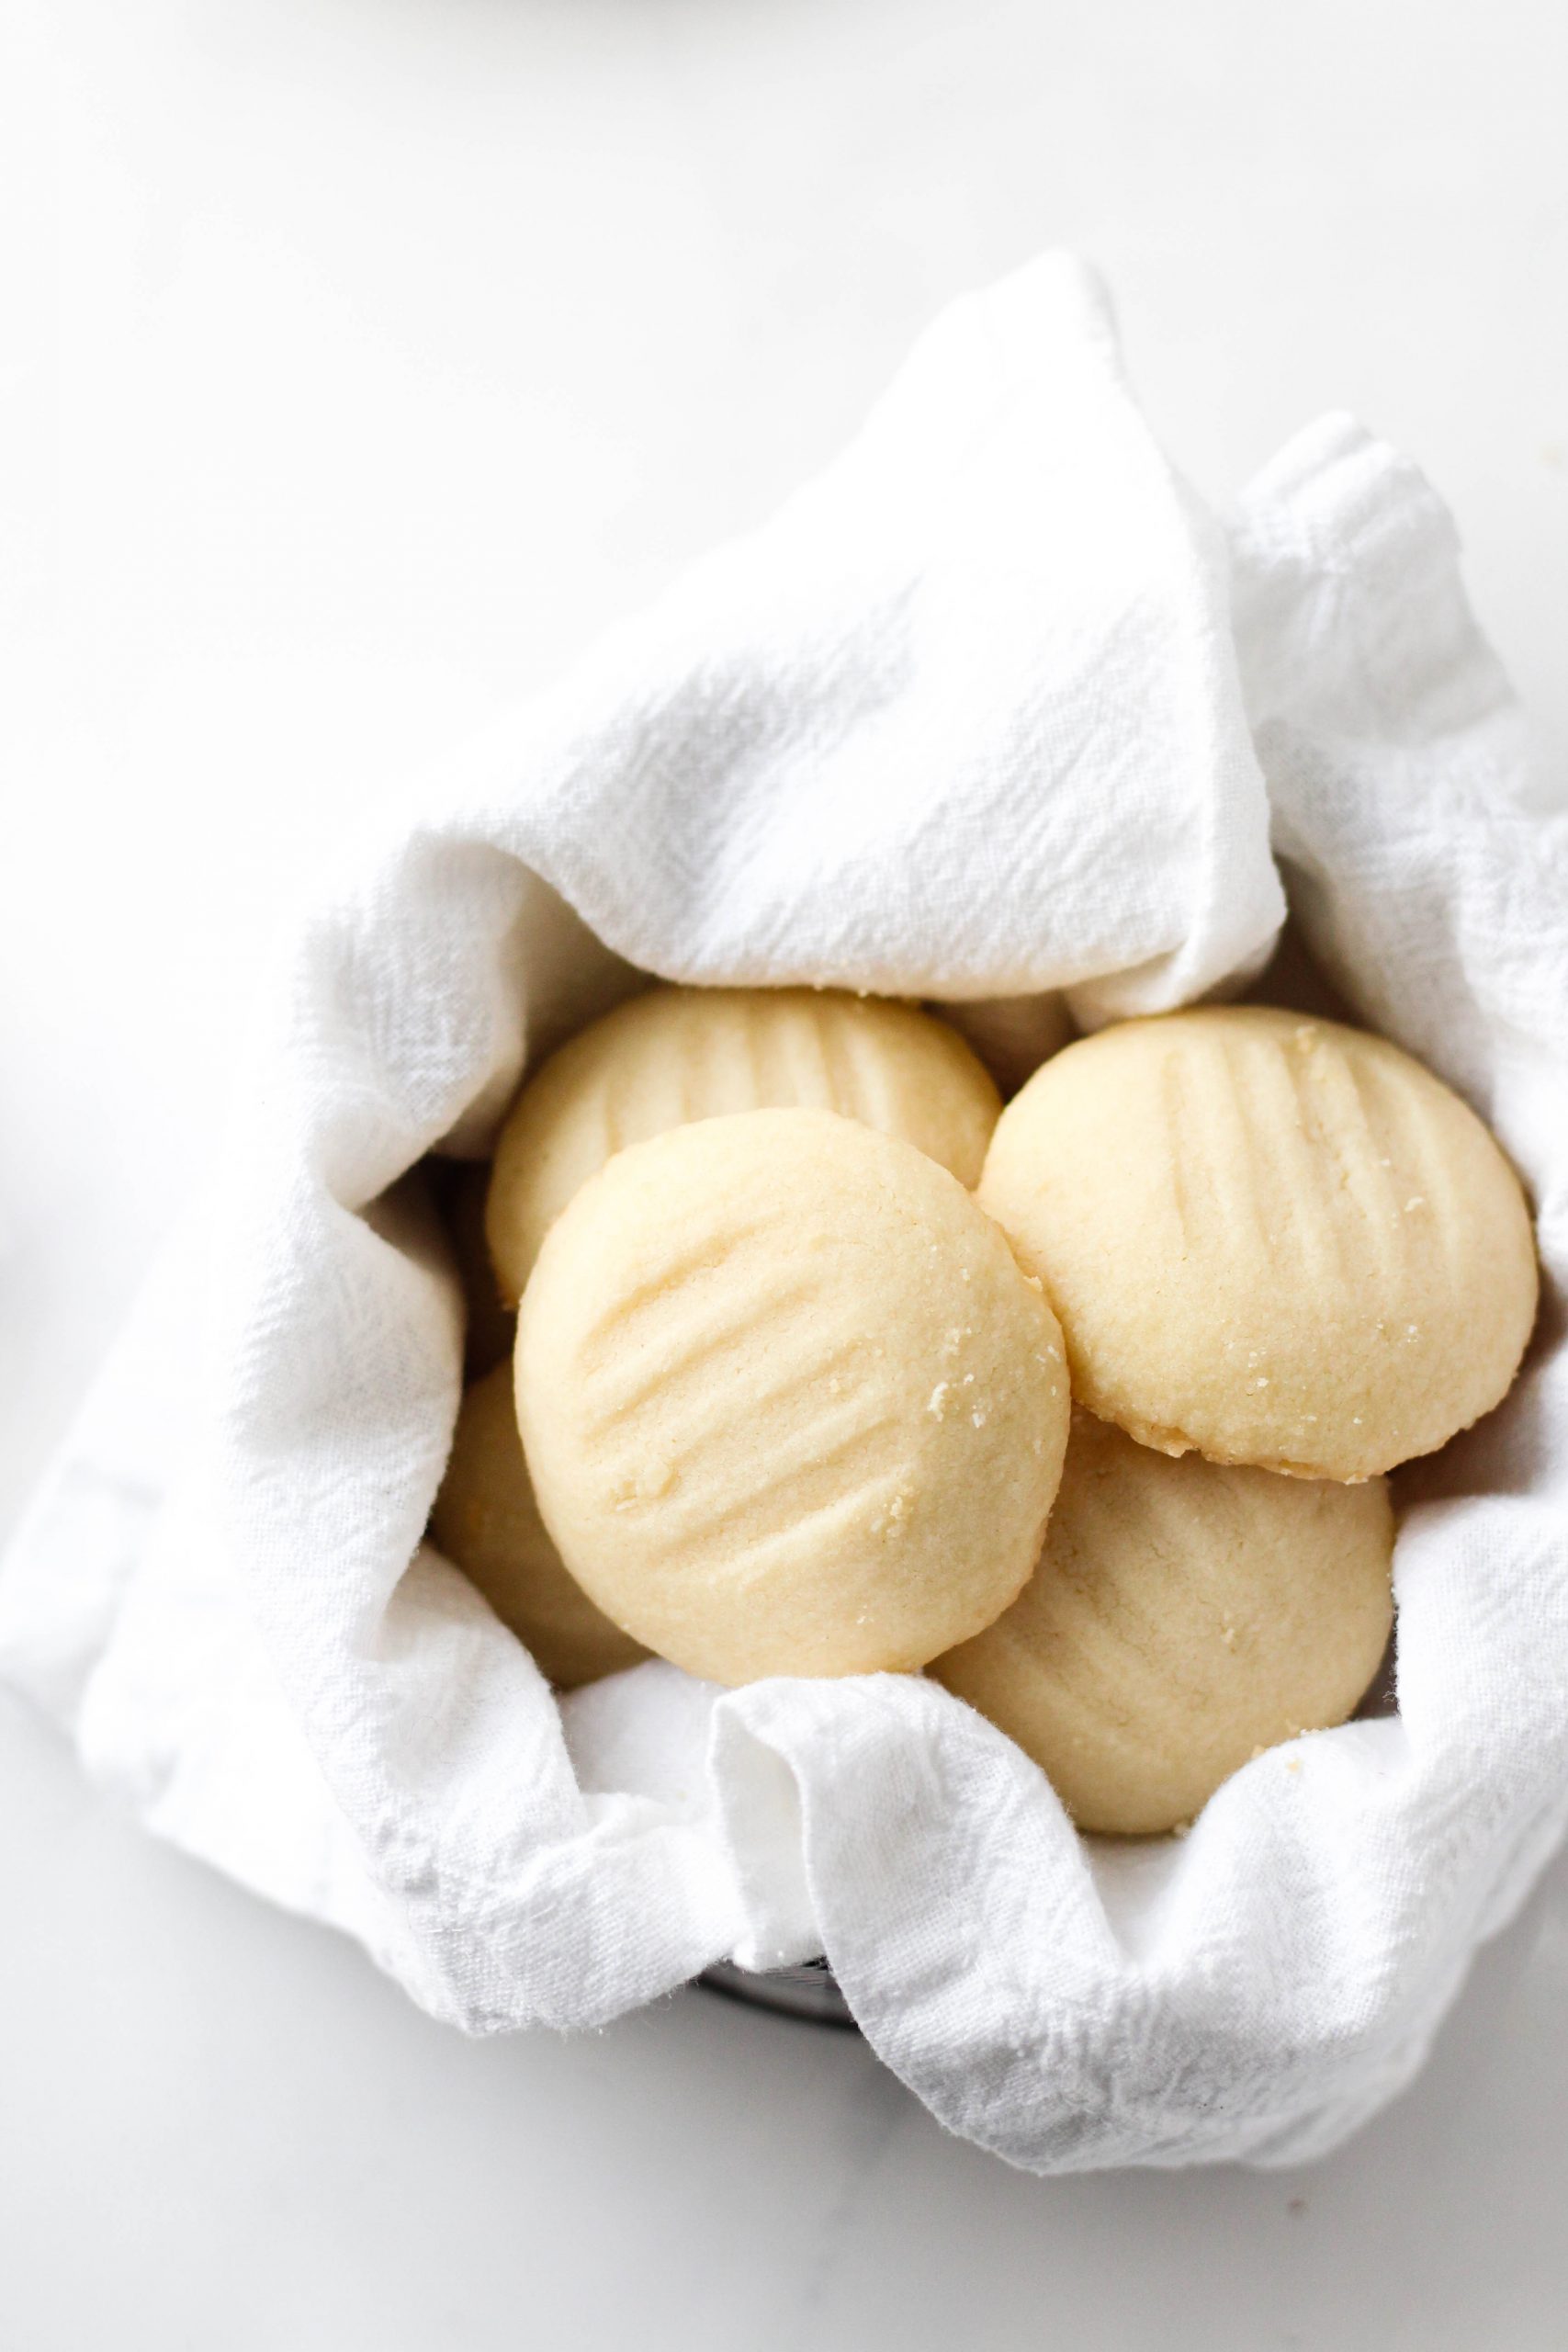 These Gluten Free Shortbread Cookies are so soft and buttery that they melt in your mouth. They're simple to make and the result is so delicious!